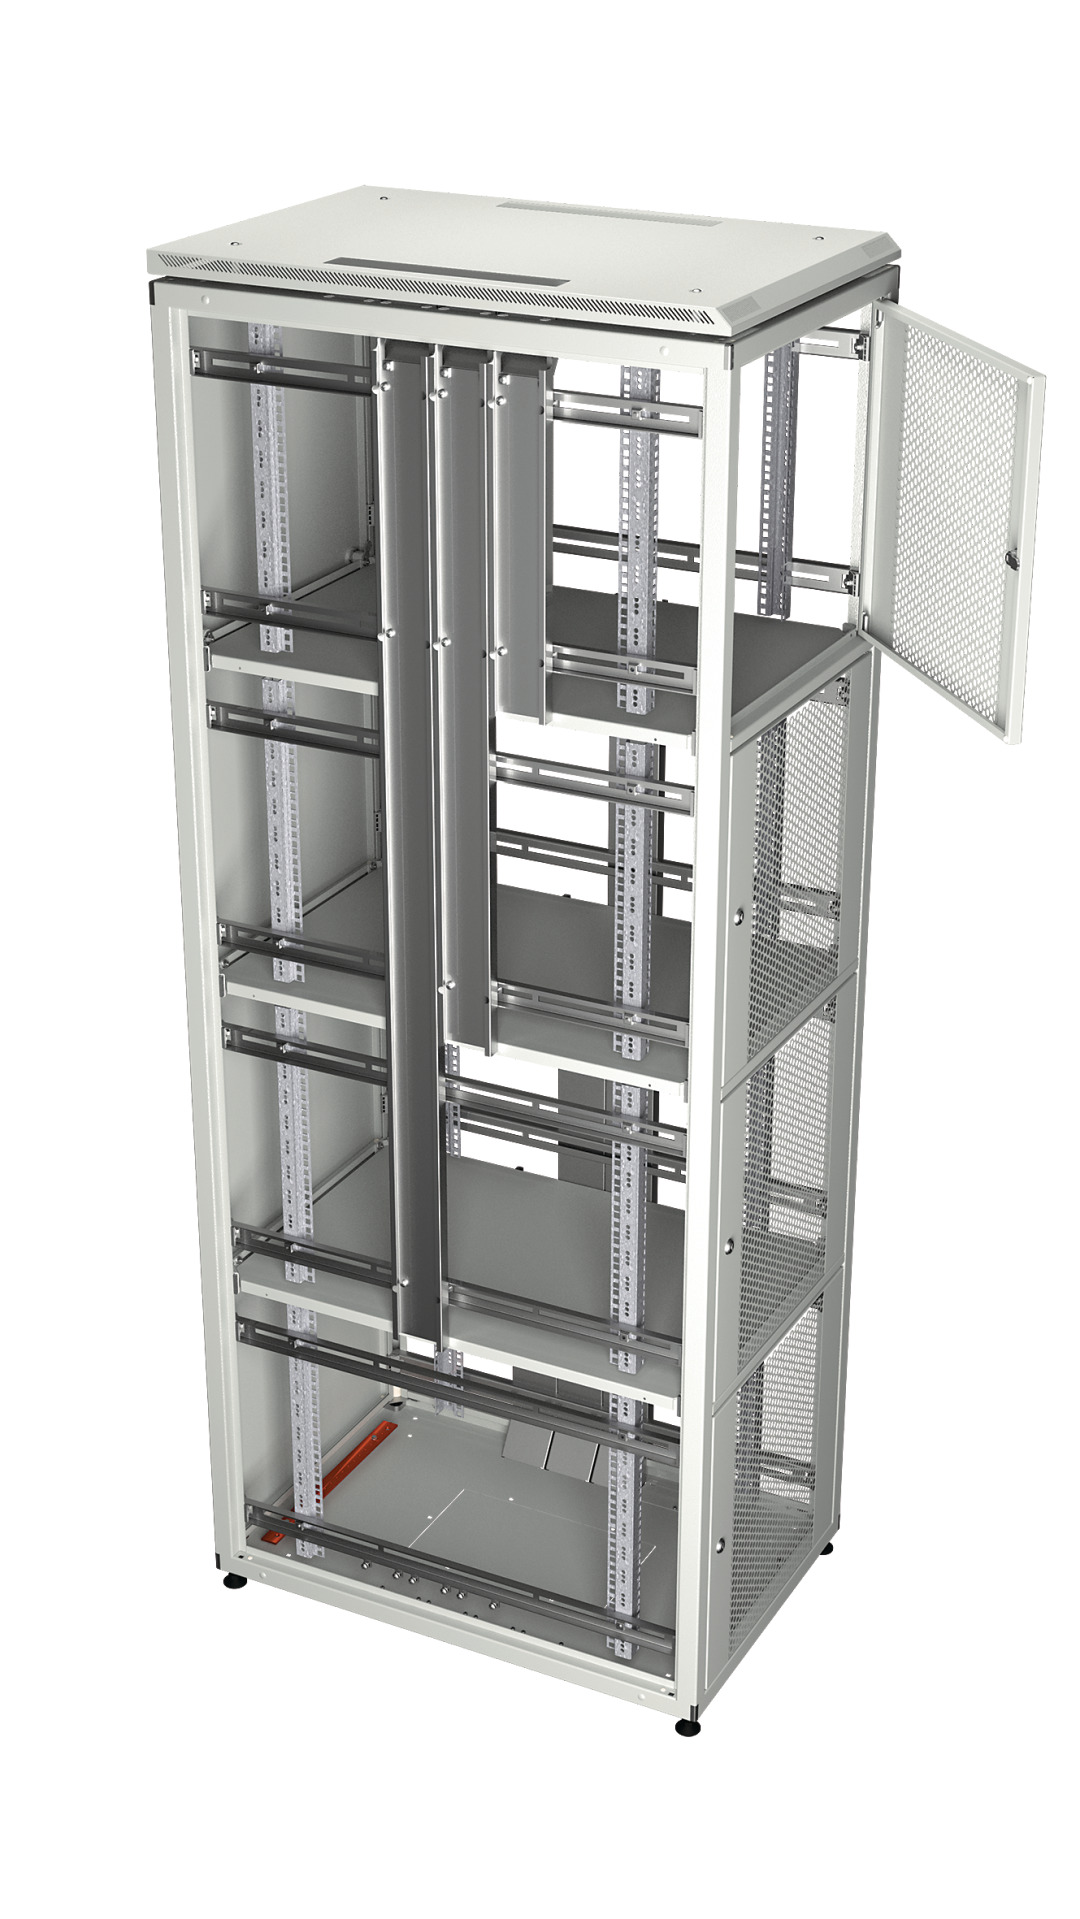 Co-Location Rack PRO, 2 x 20HE, 600x1200 mm, F+R 1-tlg. perforiert, RAL9005